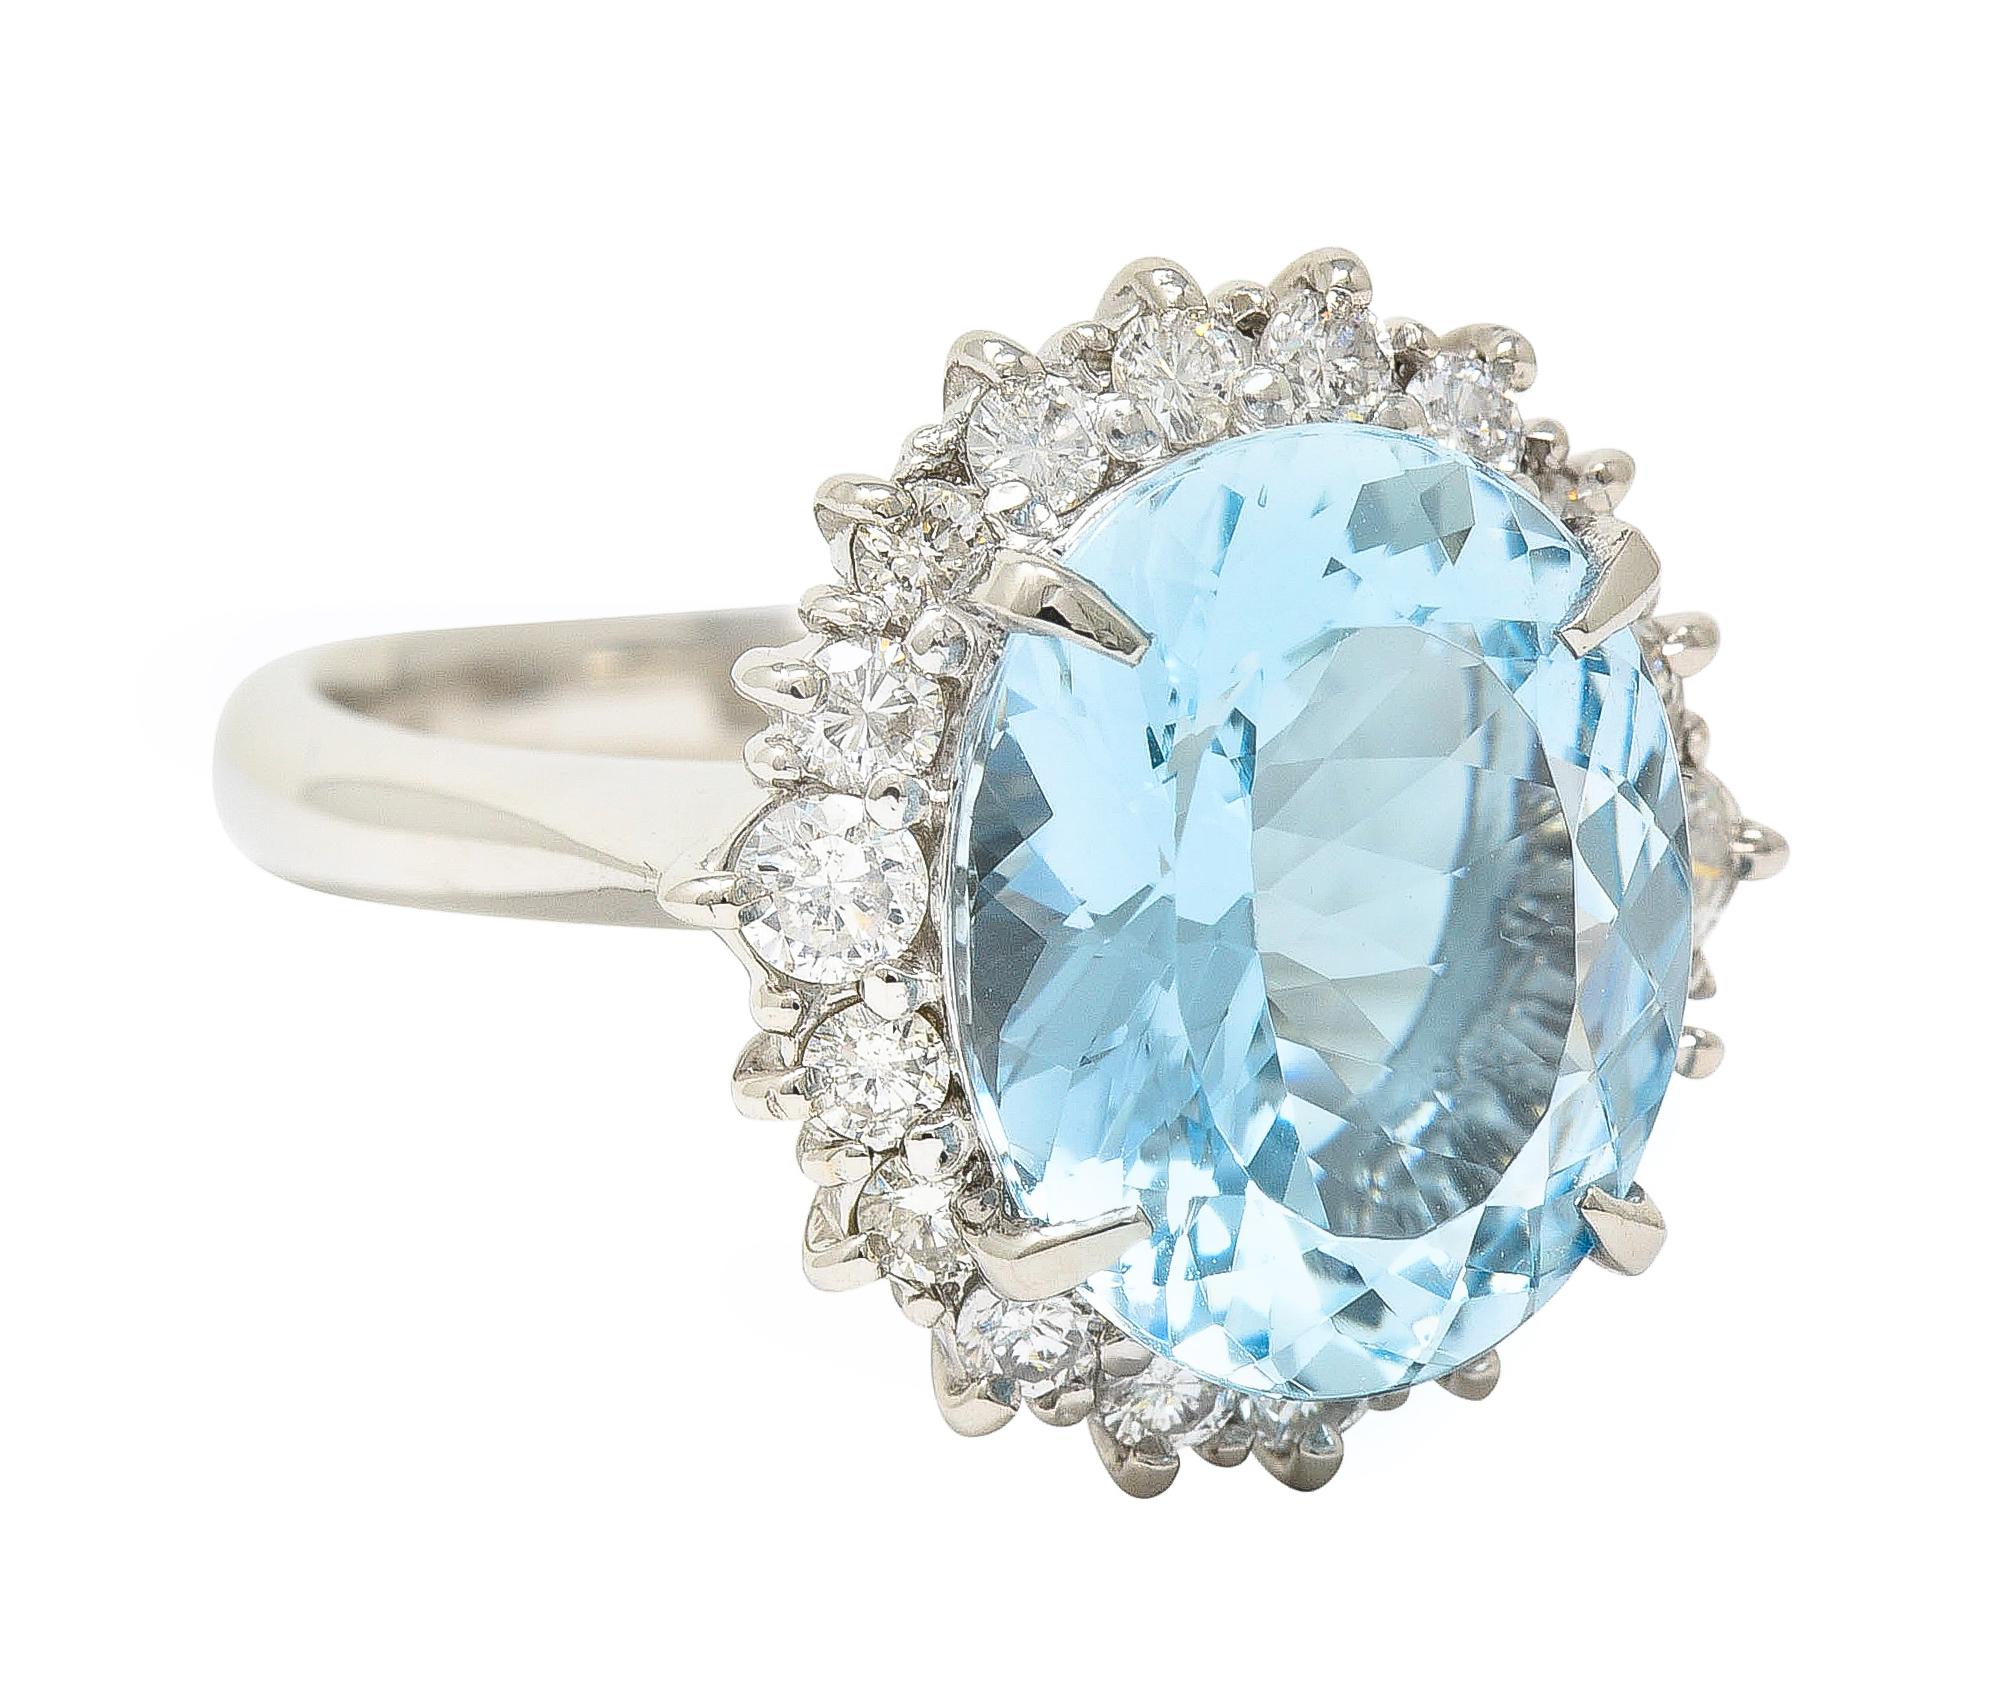 Centering an oval cut aquamarine weighing 4.87 carats total 
Transparent light blue in color - prong set
With a halo surround of round brilliant cut diamonds 
Weighing 0.68 carat total - G/H color with VS clarity
Pring set in a wire basket
With high